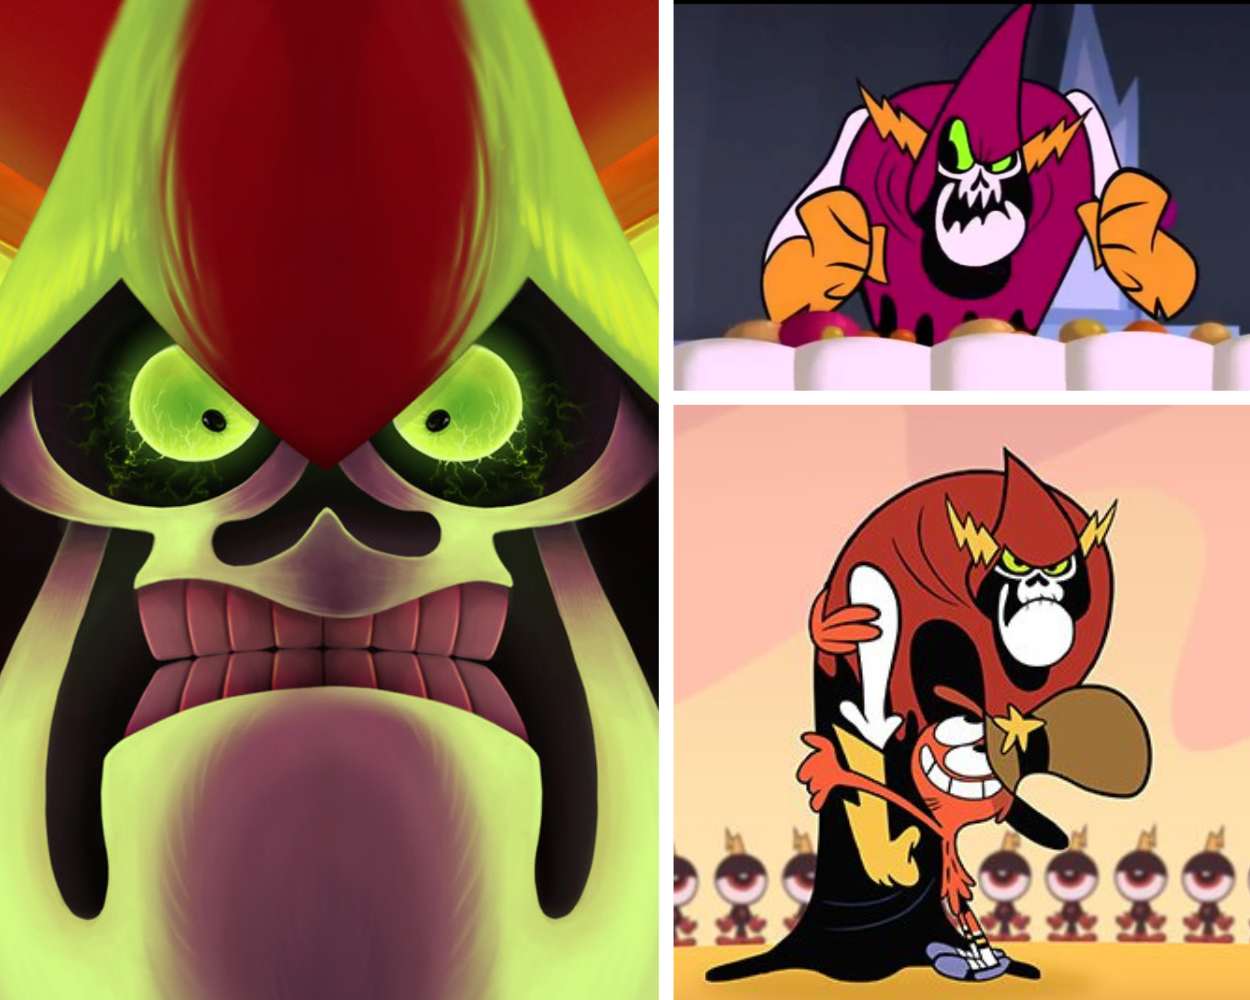 Lord Hater's Powers and Abilities